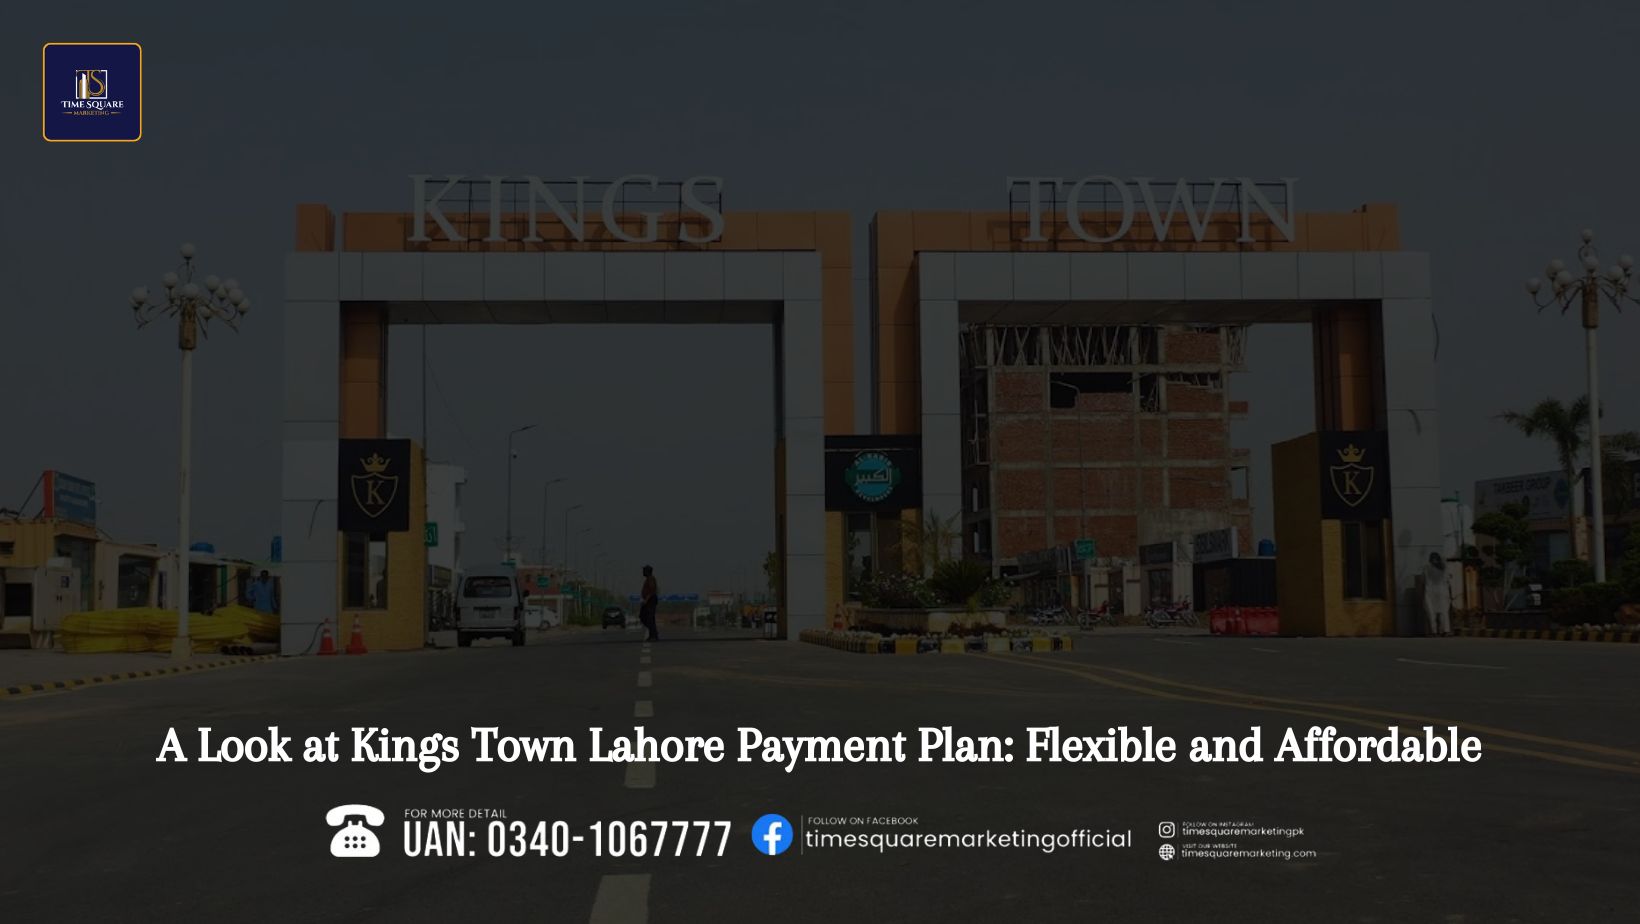 A Look at Kings Town Lahore Payment Plan Flexible and Affordable